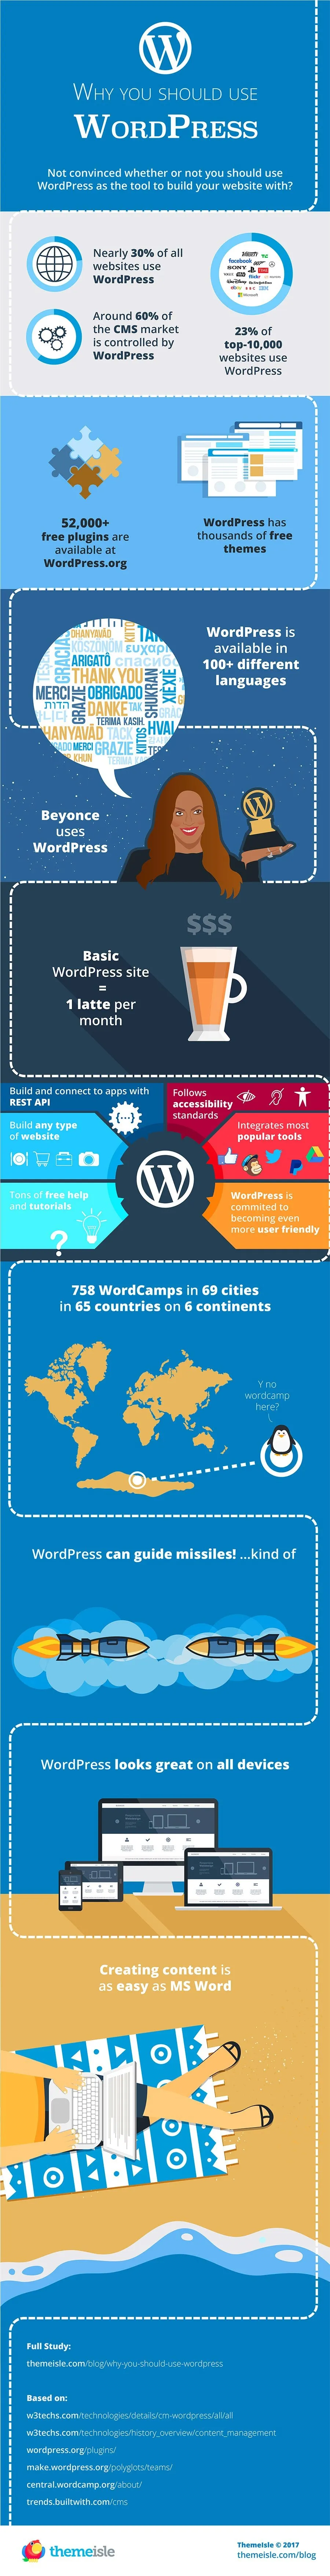 Why You Should Use Wordpress? - #infographic